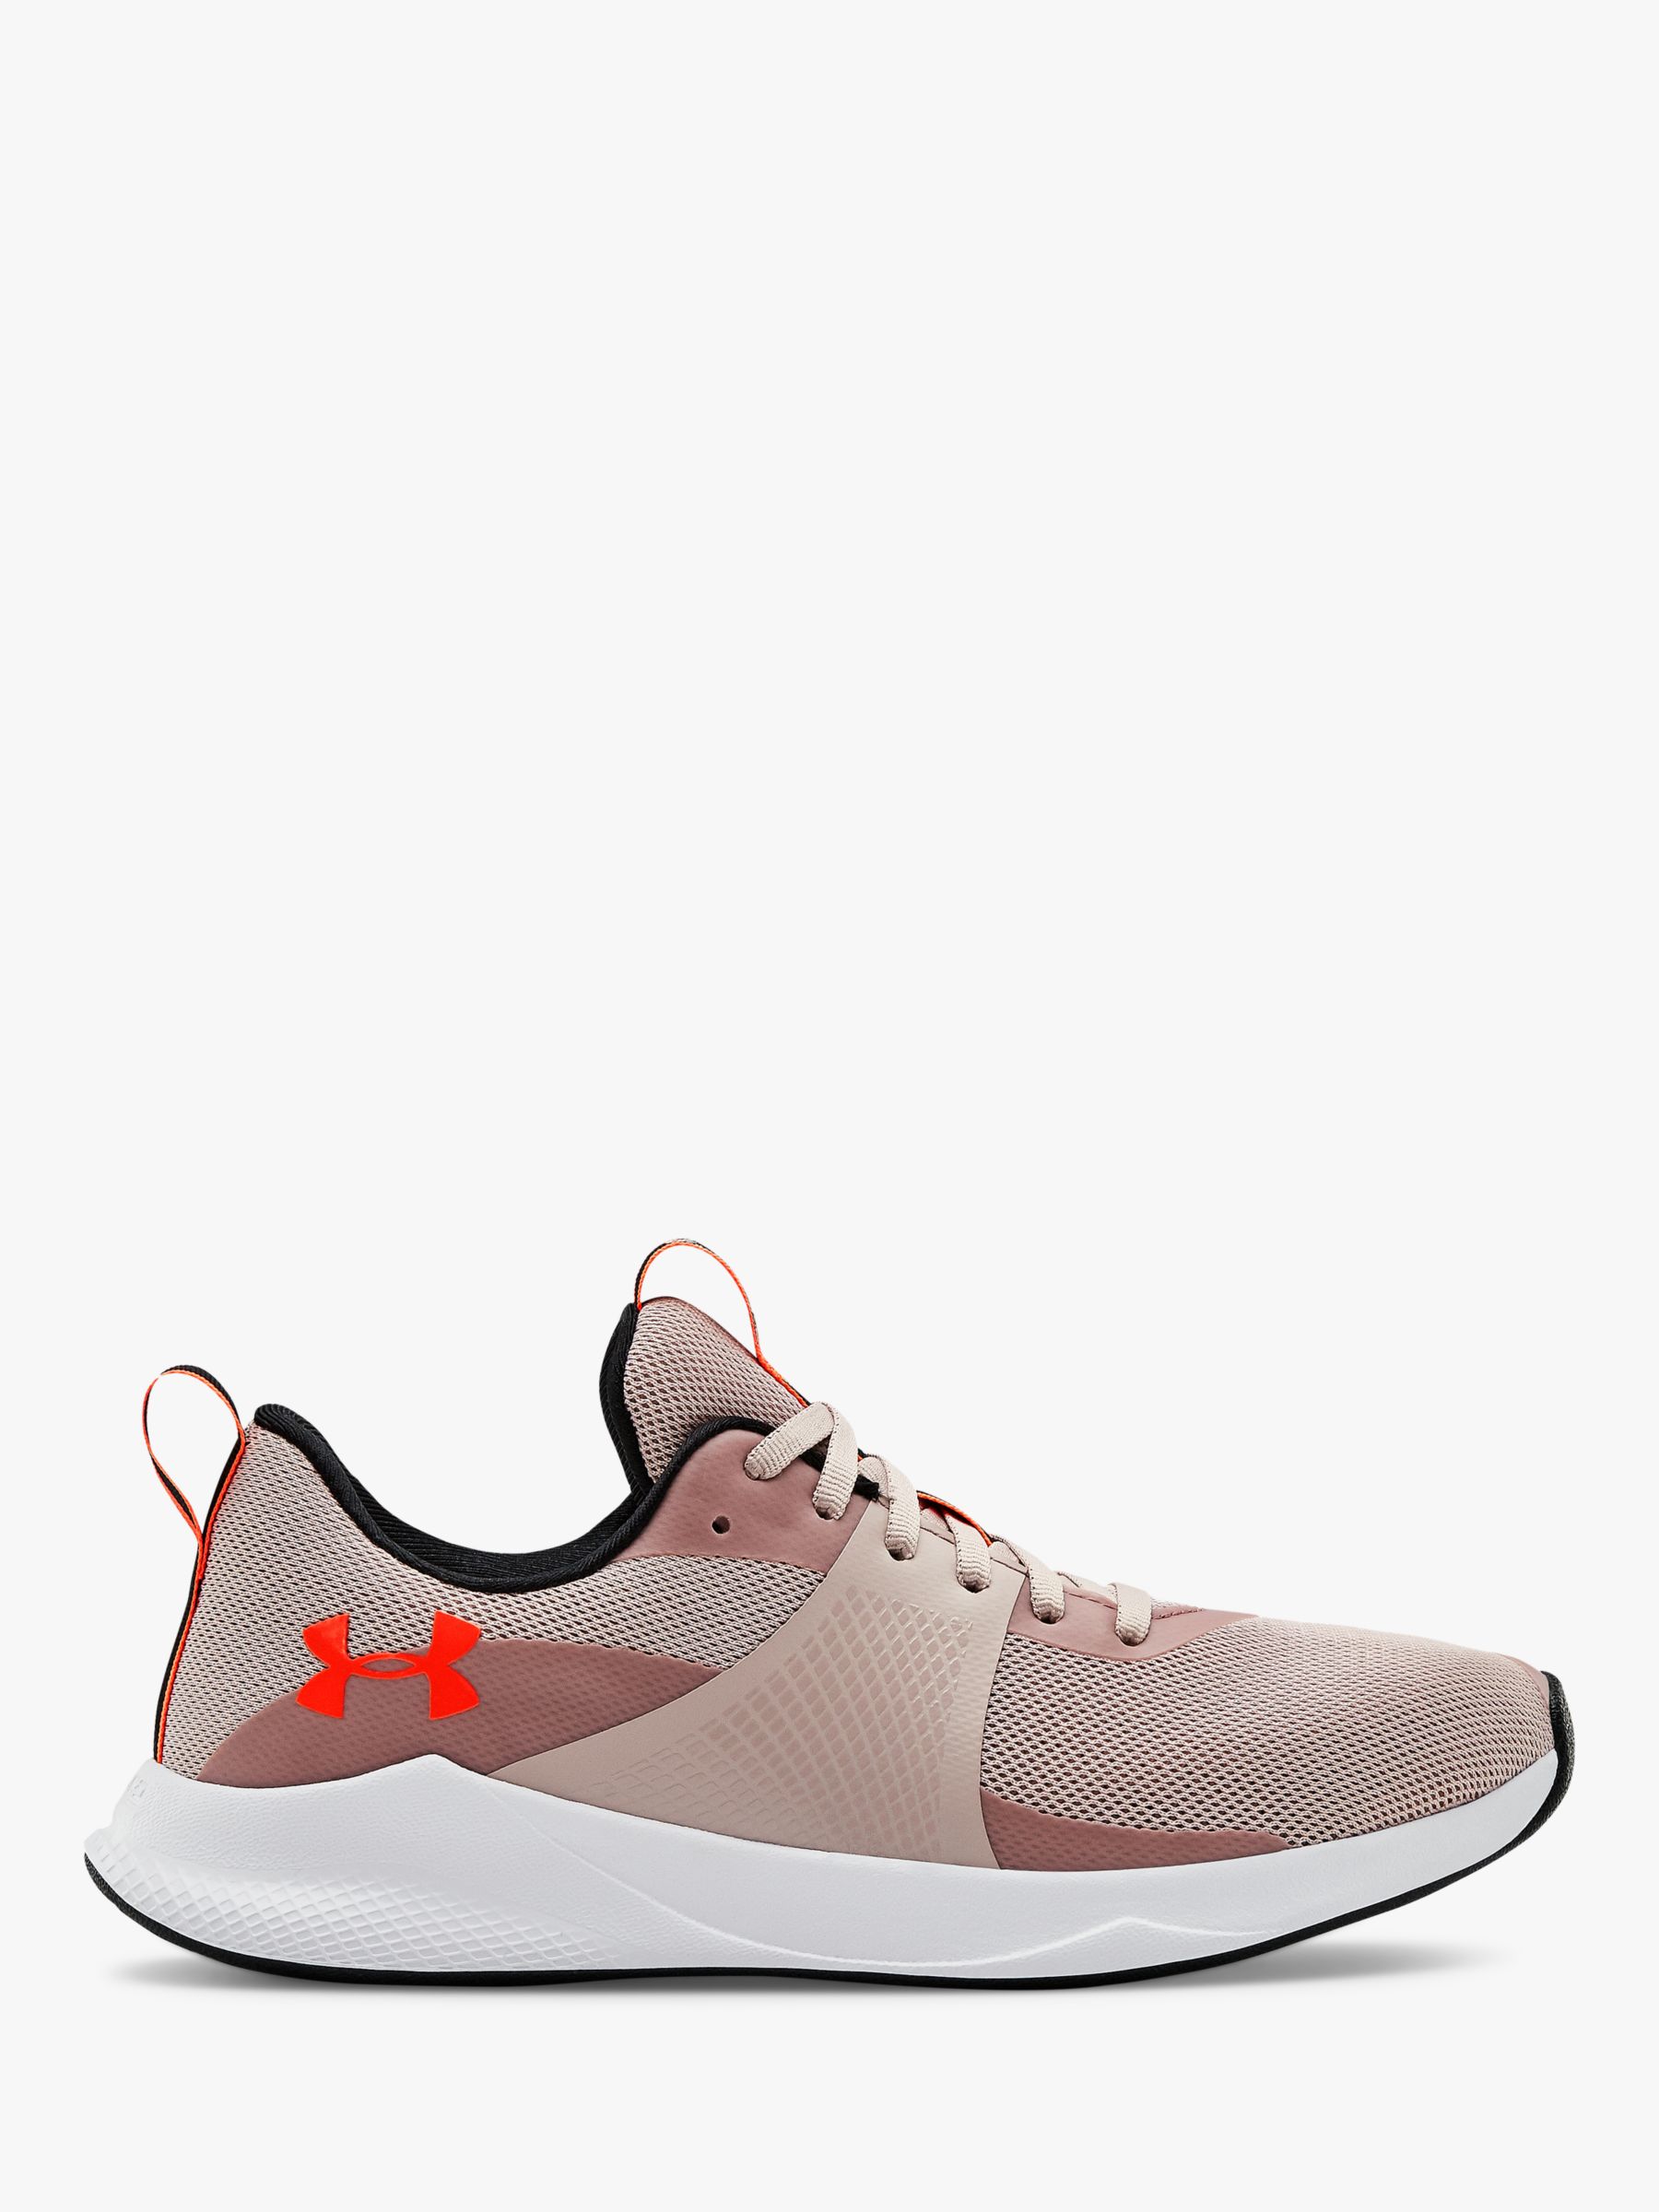 under armour women's cross training shoes